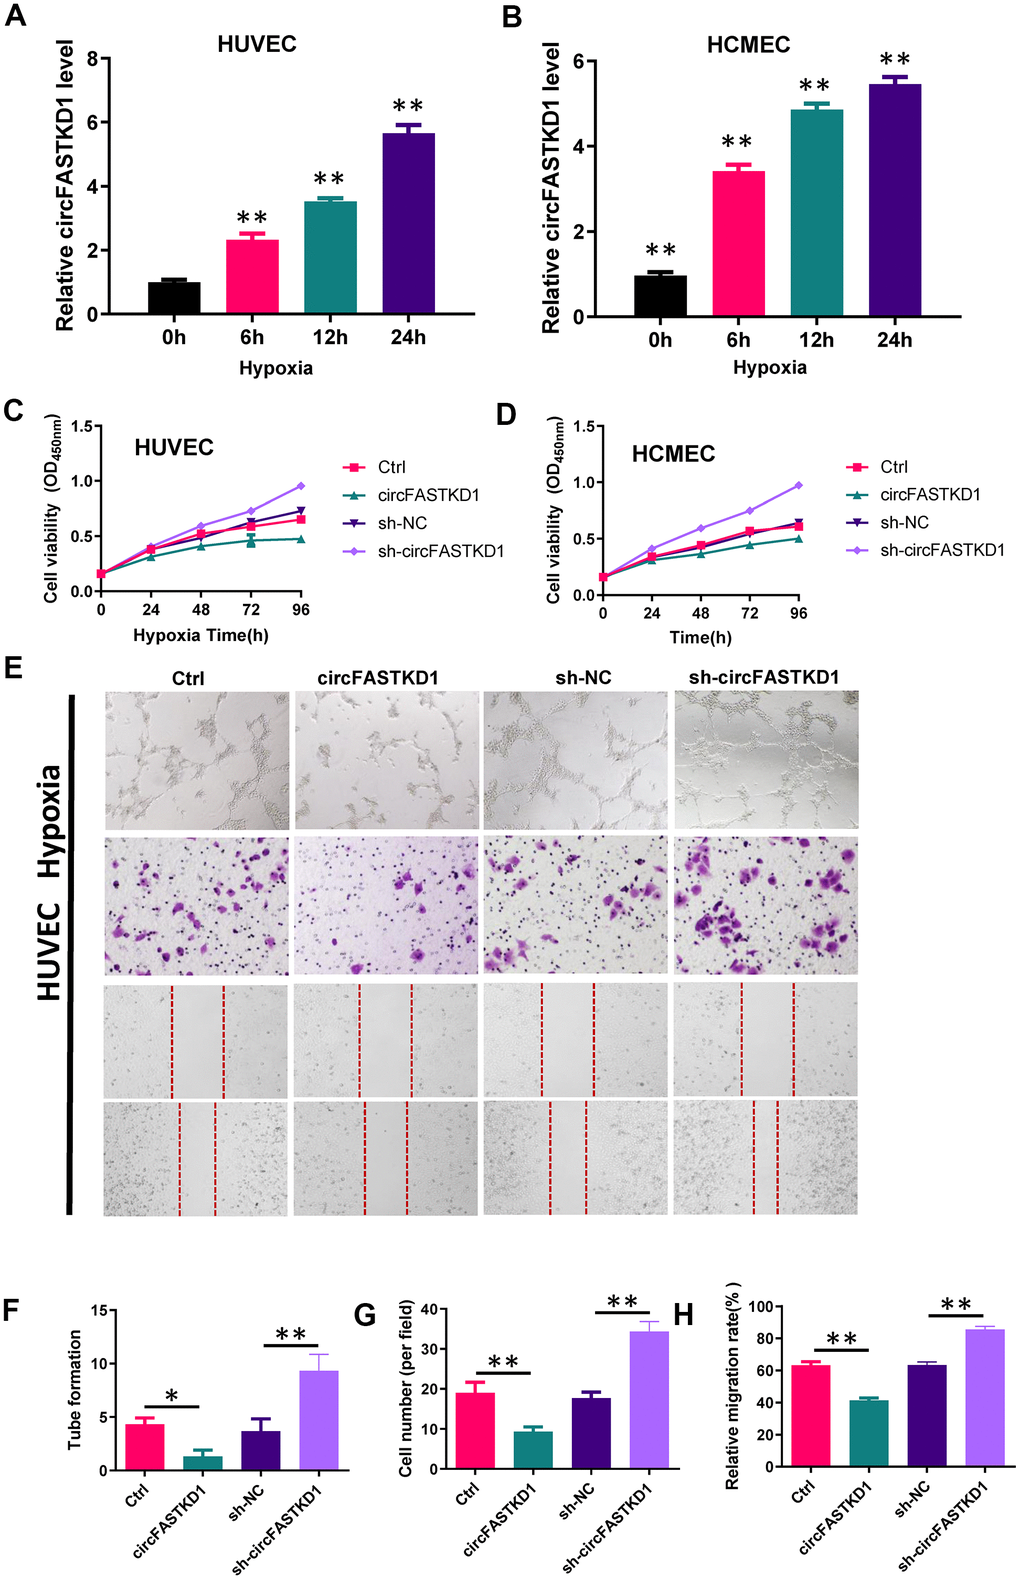 The downregulation of circFASTKD1 benefits vascular endothelial cells under hypoxic conditions. (A, B) qRT-PCR was used to determine circFASTKD1 levels in HUVECs (A) and HCMECs (B) under hypoxic conditions. (C, D) CCK-8 assays were used to determine the growth curves of HUVECs (C) and HCMECs (D) with up/downregulated circFASTKD1 under hypoxic conditions. (E) Photographs from the tube formation, cell migration and wound healing assays in HUVECs with different treatments under hypoxic conditions. (F–H) Quantitative analyses of the tube formation (F), cell migration (G) and wound healing (H) assays in HUVECs under hypoxic conditions.